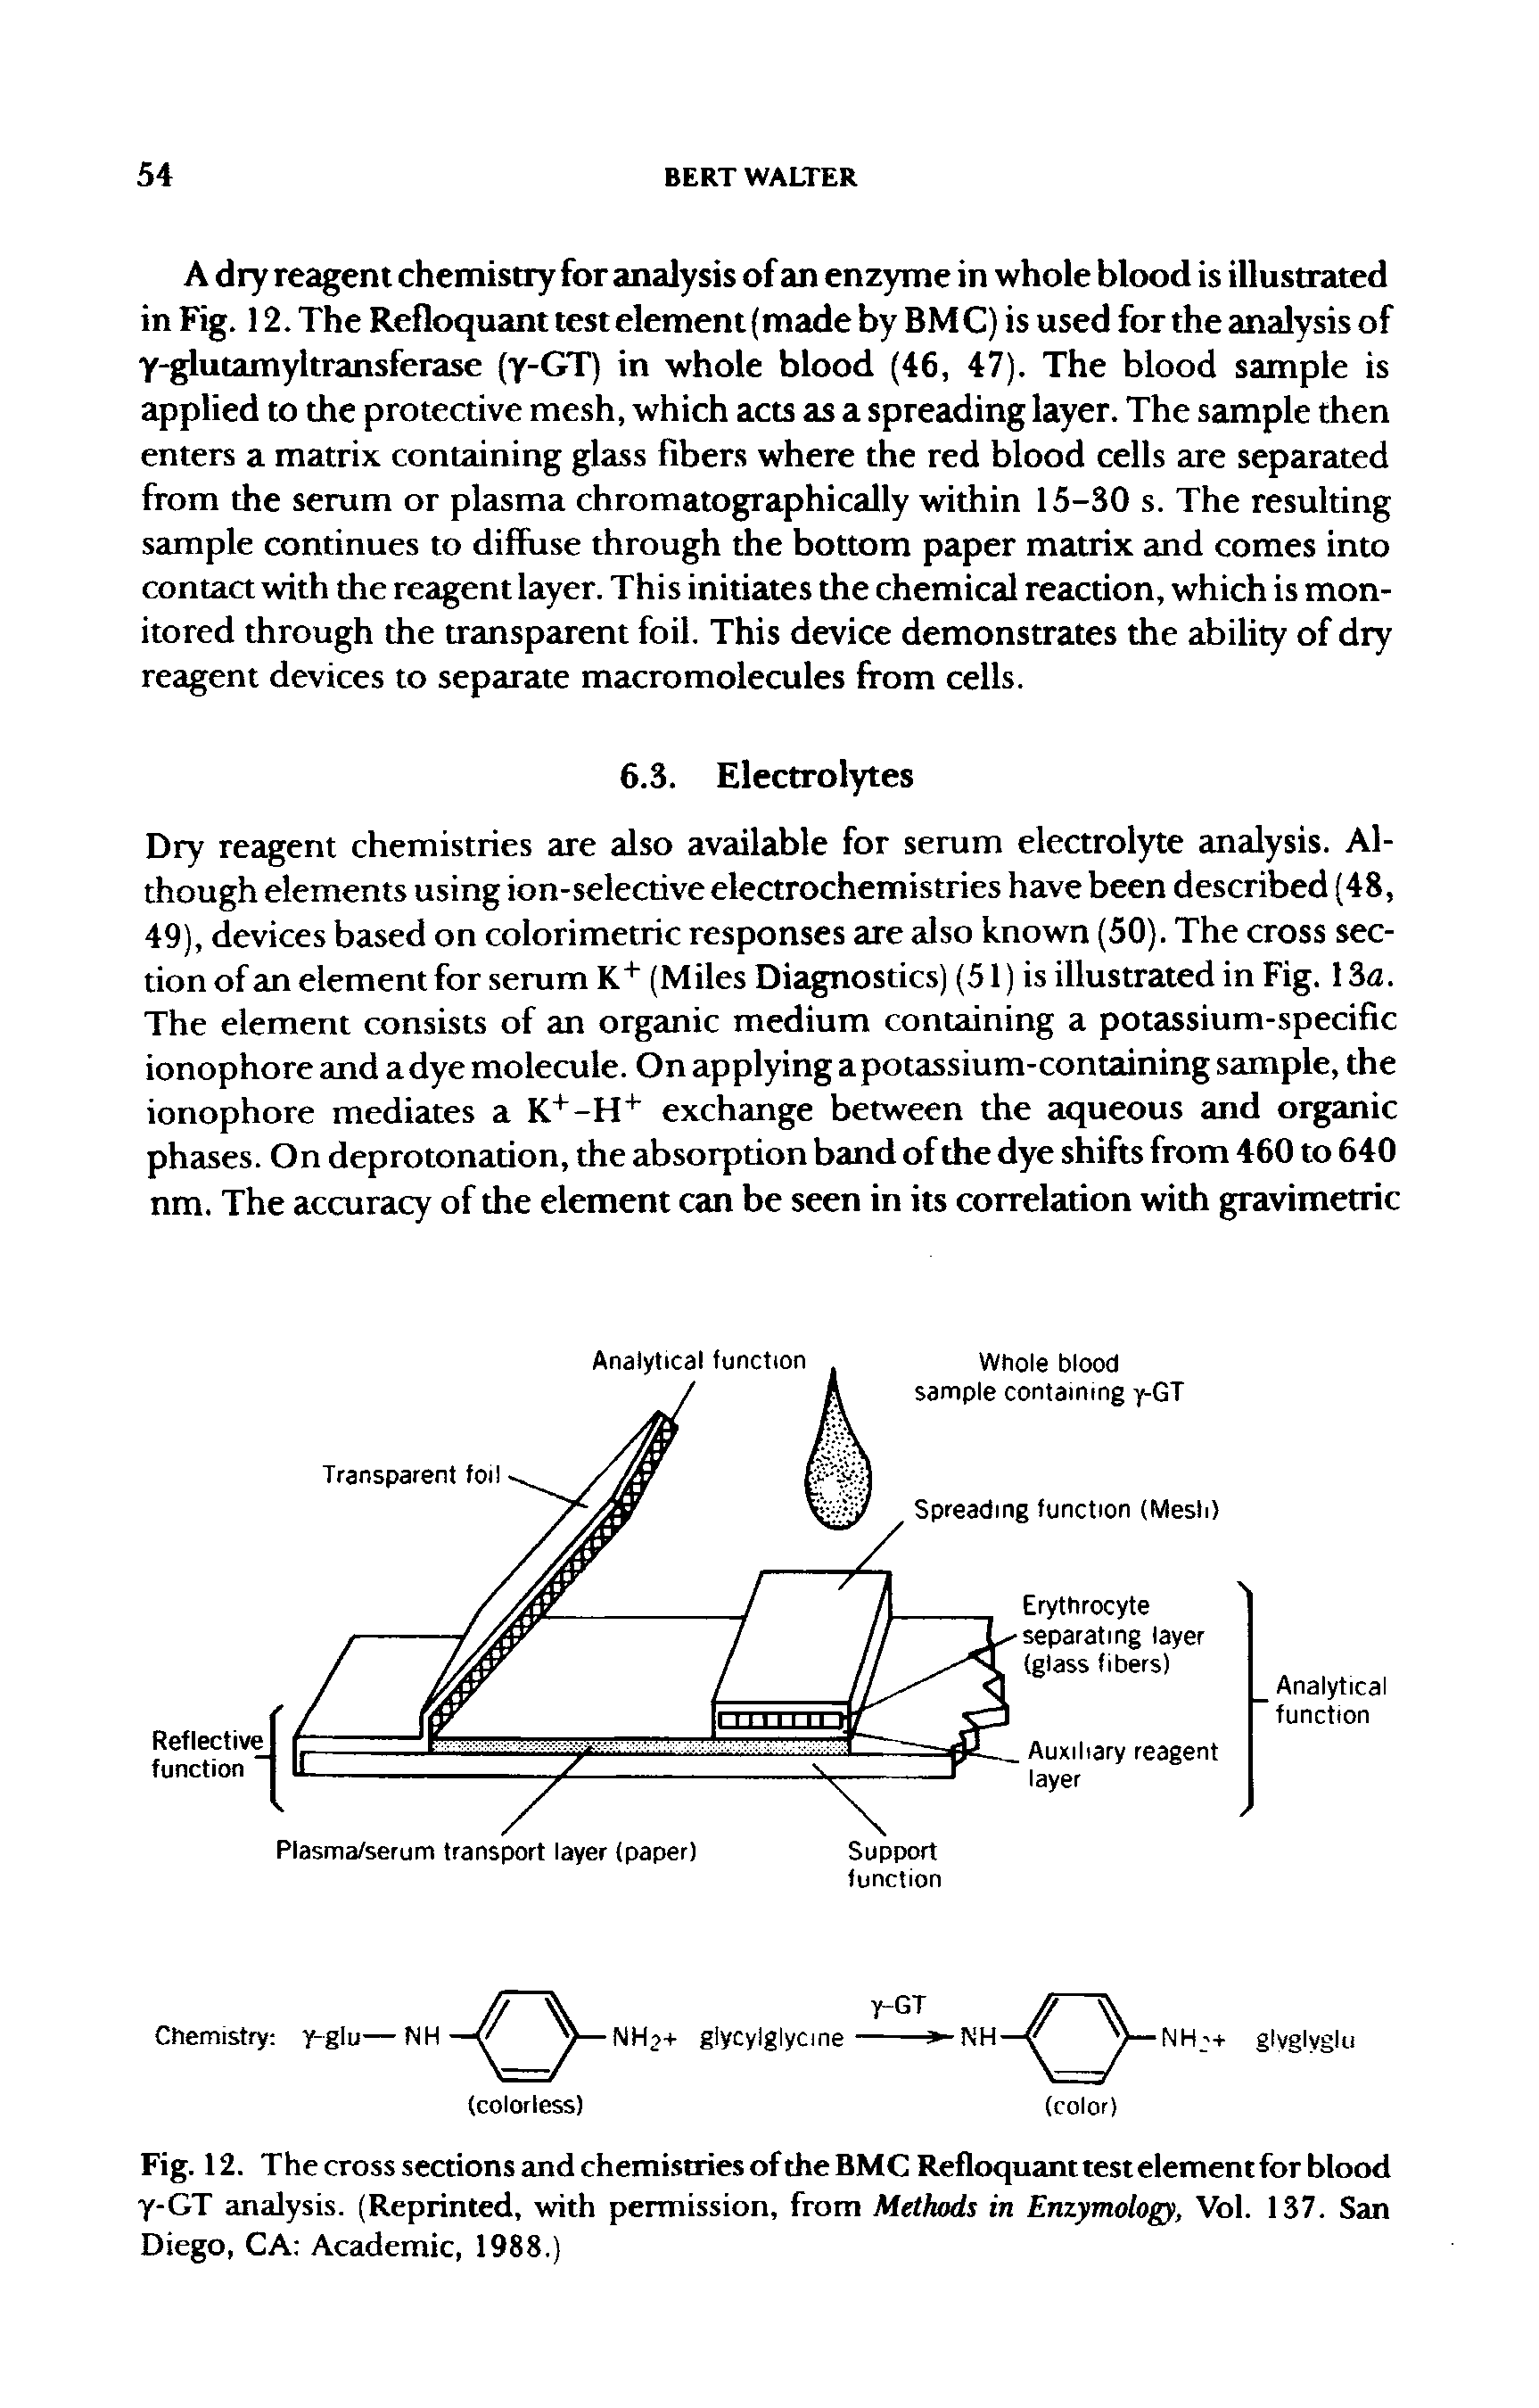 Fig. 12. The cross sections and chemisuries of the BMC Refloquant test element for blood y-GT analysis. (Reprinted, with permission, from Methods in Enzymologf, Vol. 137. San Diego, CA Academic, 1988.)...